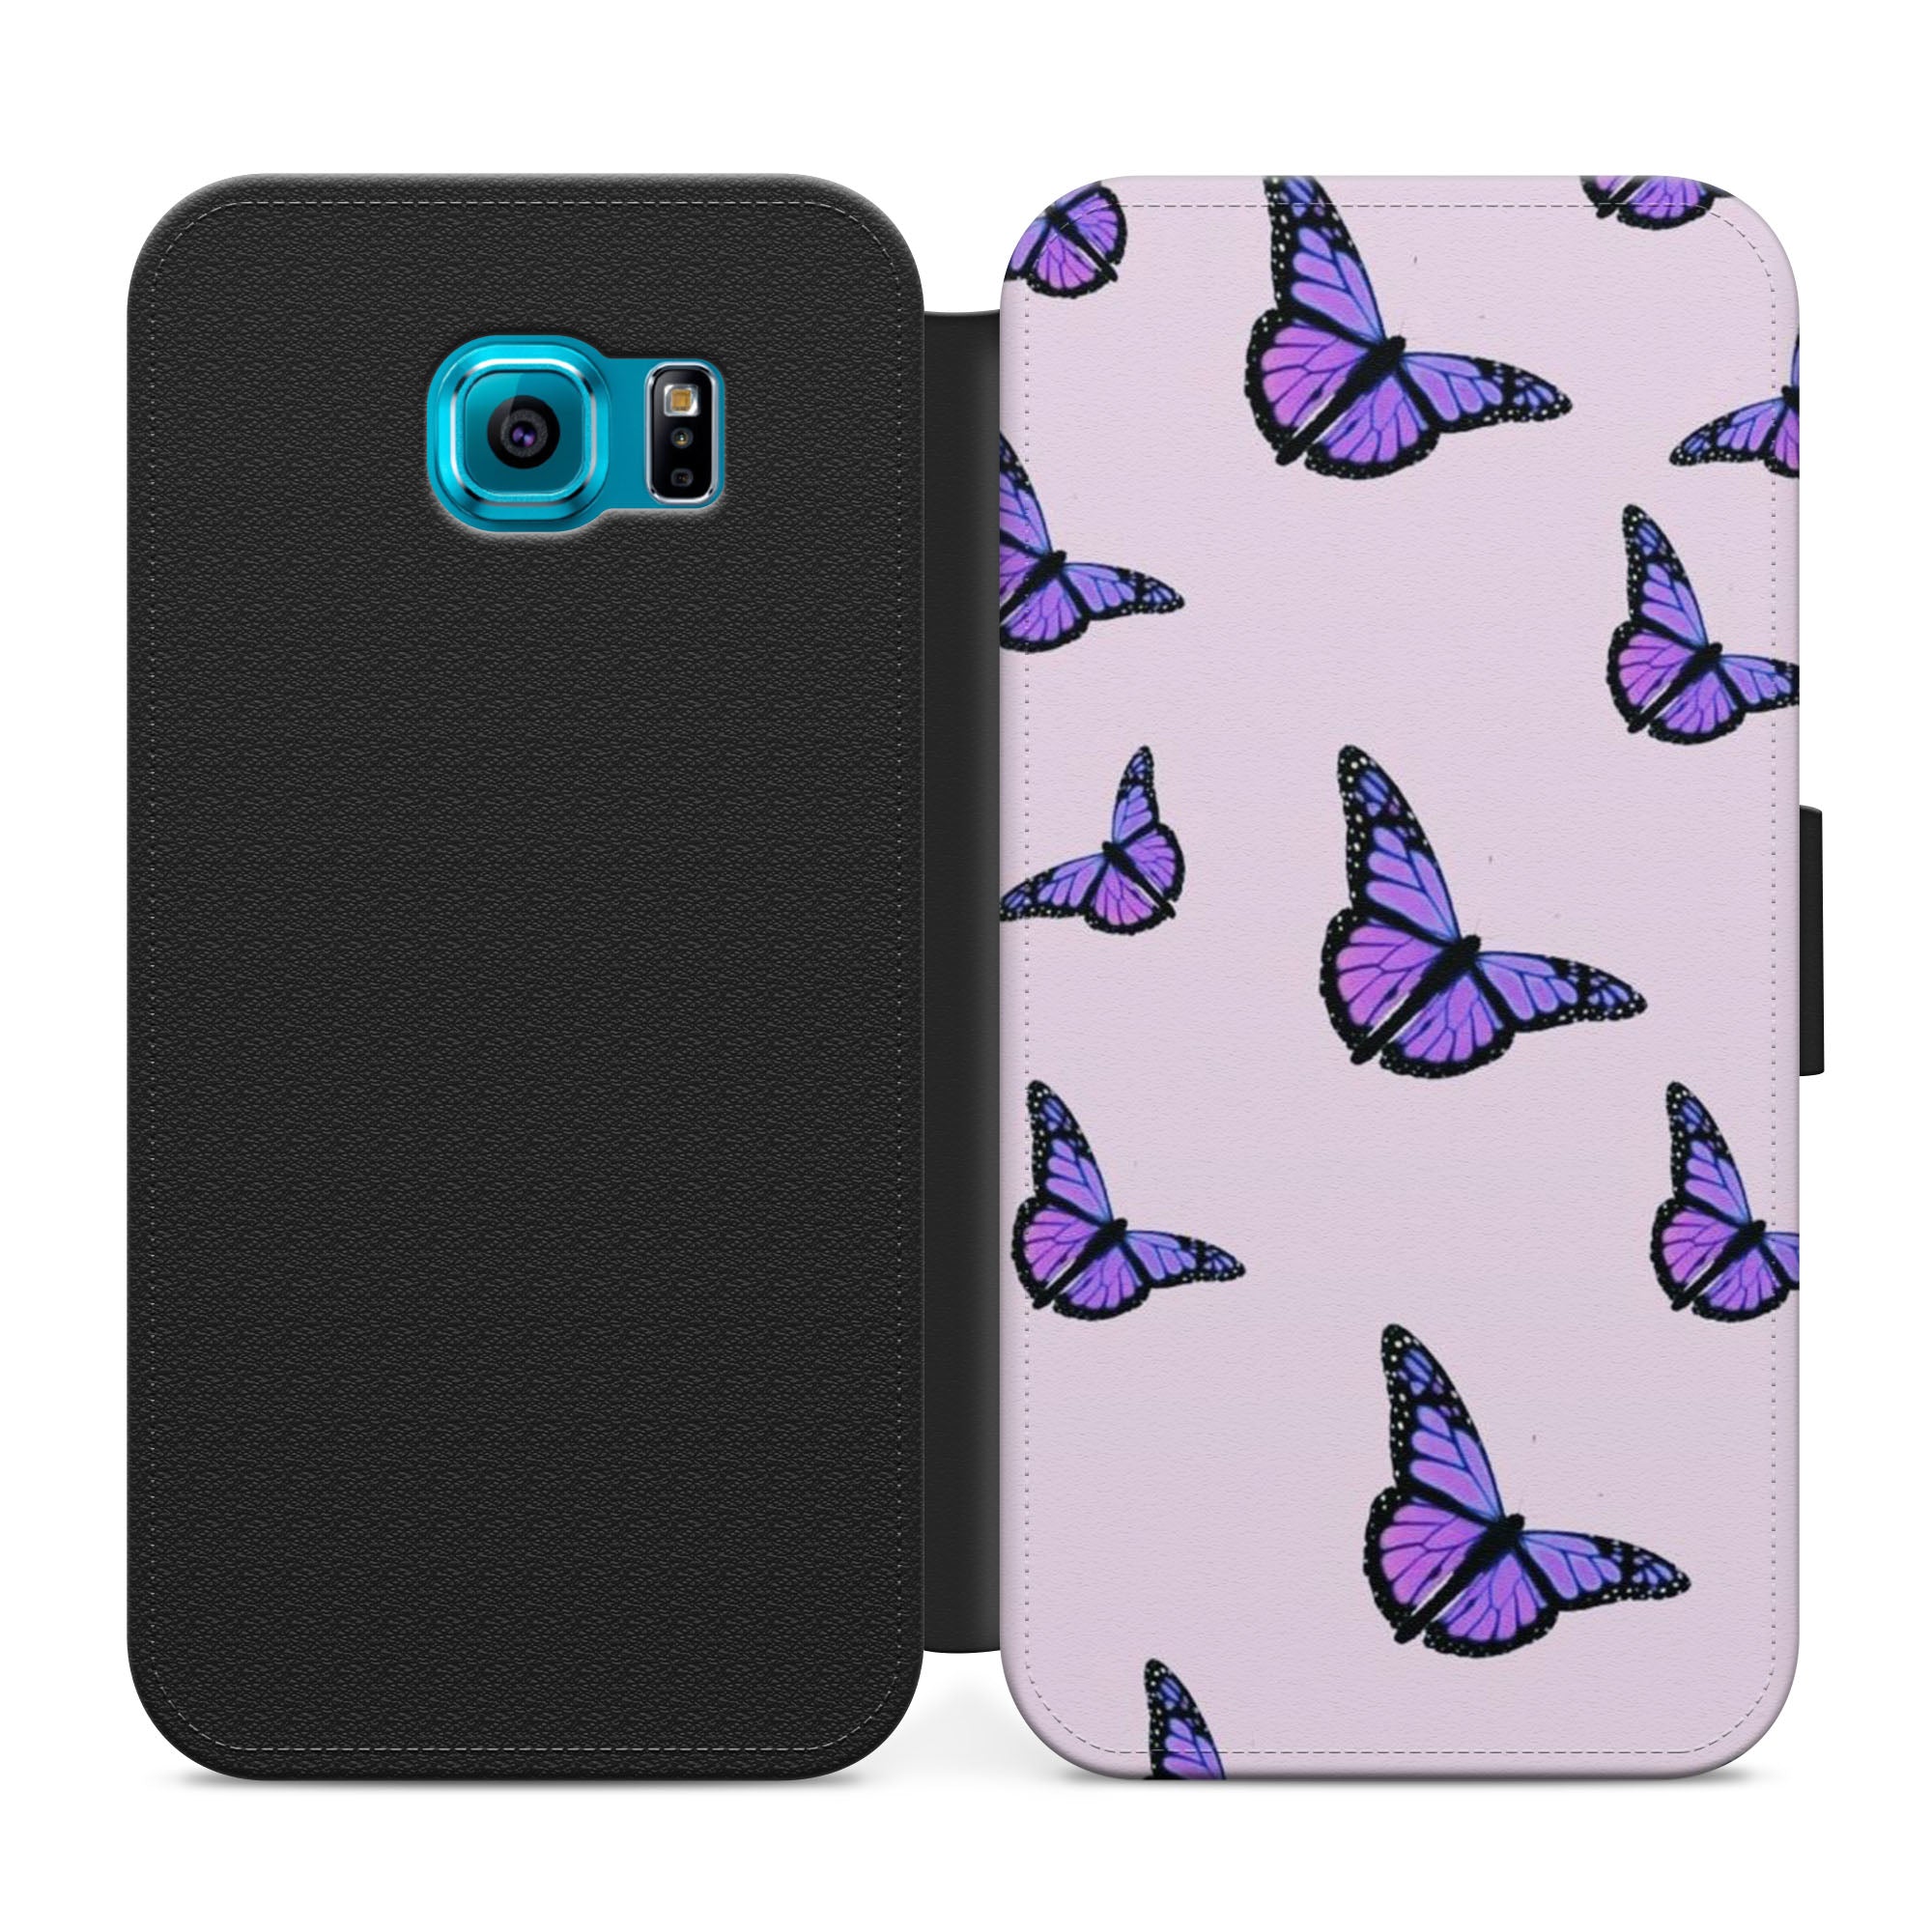 Aesthetic Pastel Butterfly Faux Leather Flip Case Wallet for iPhone / Samsung